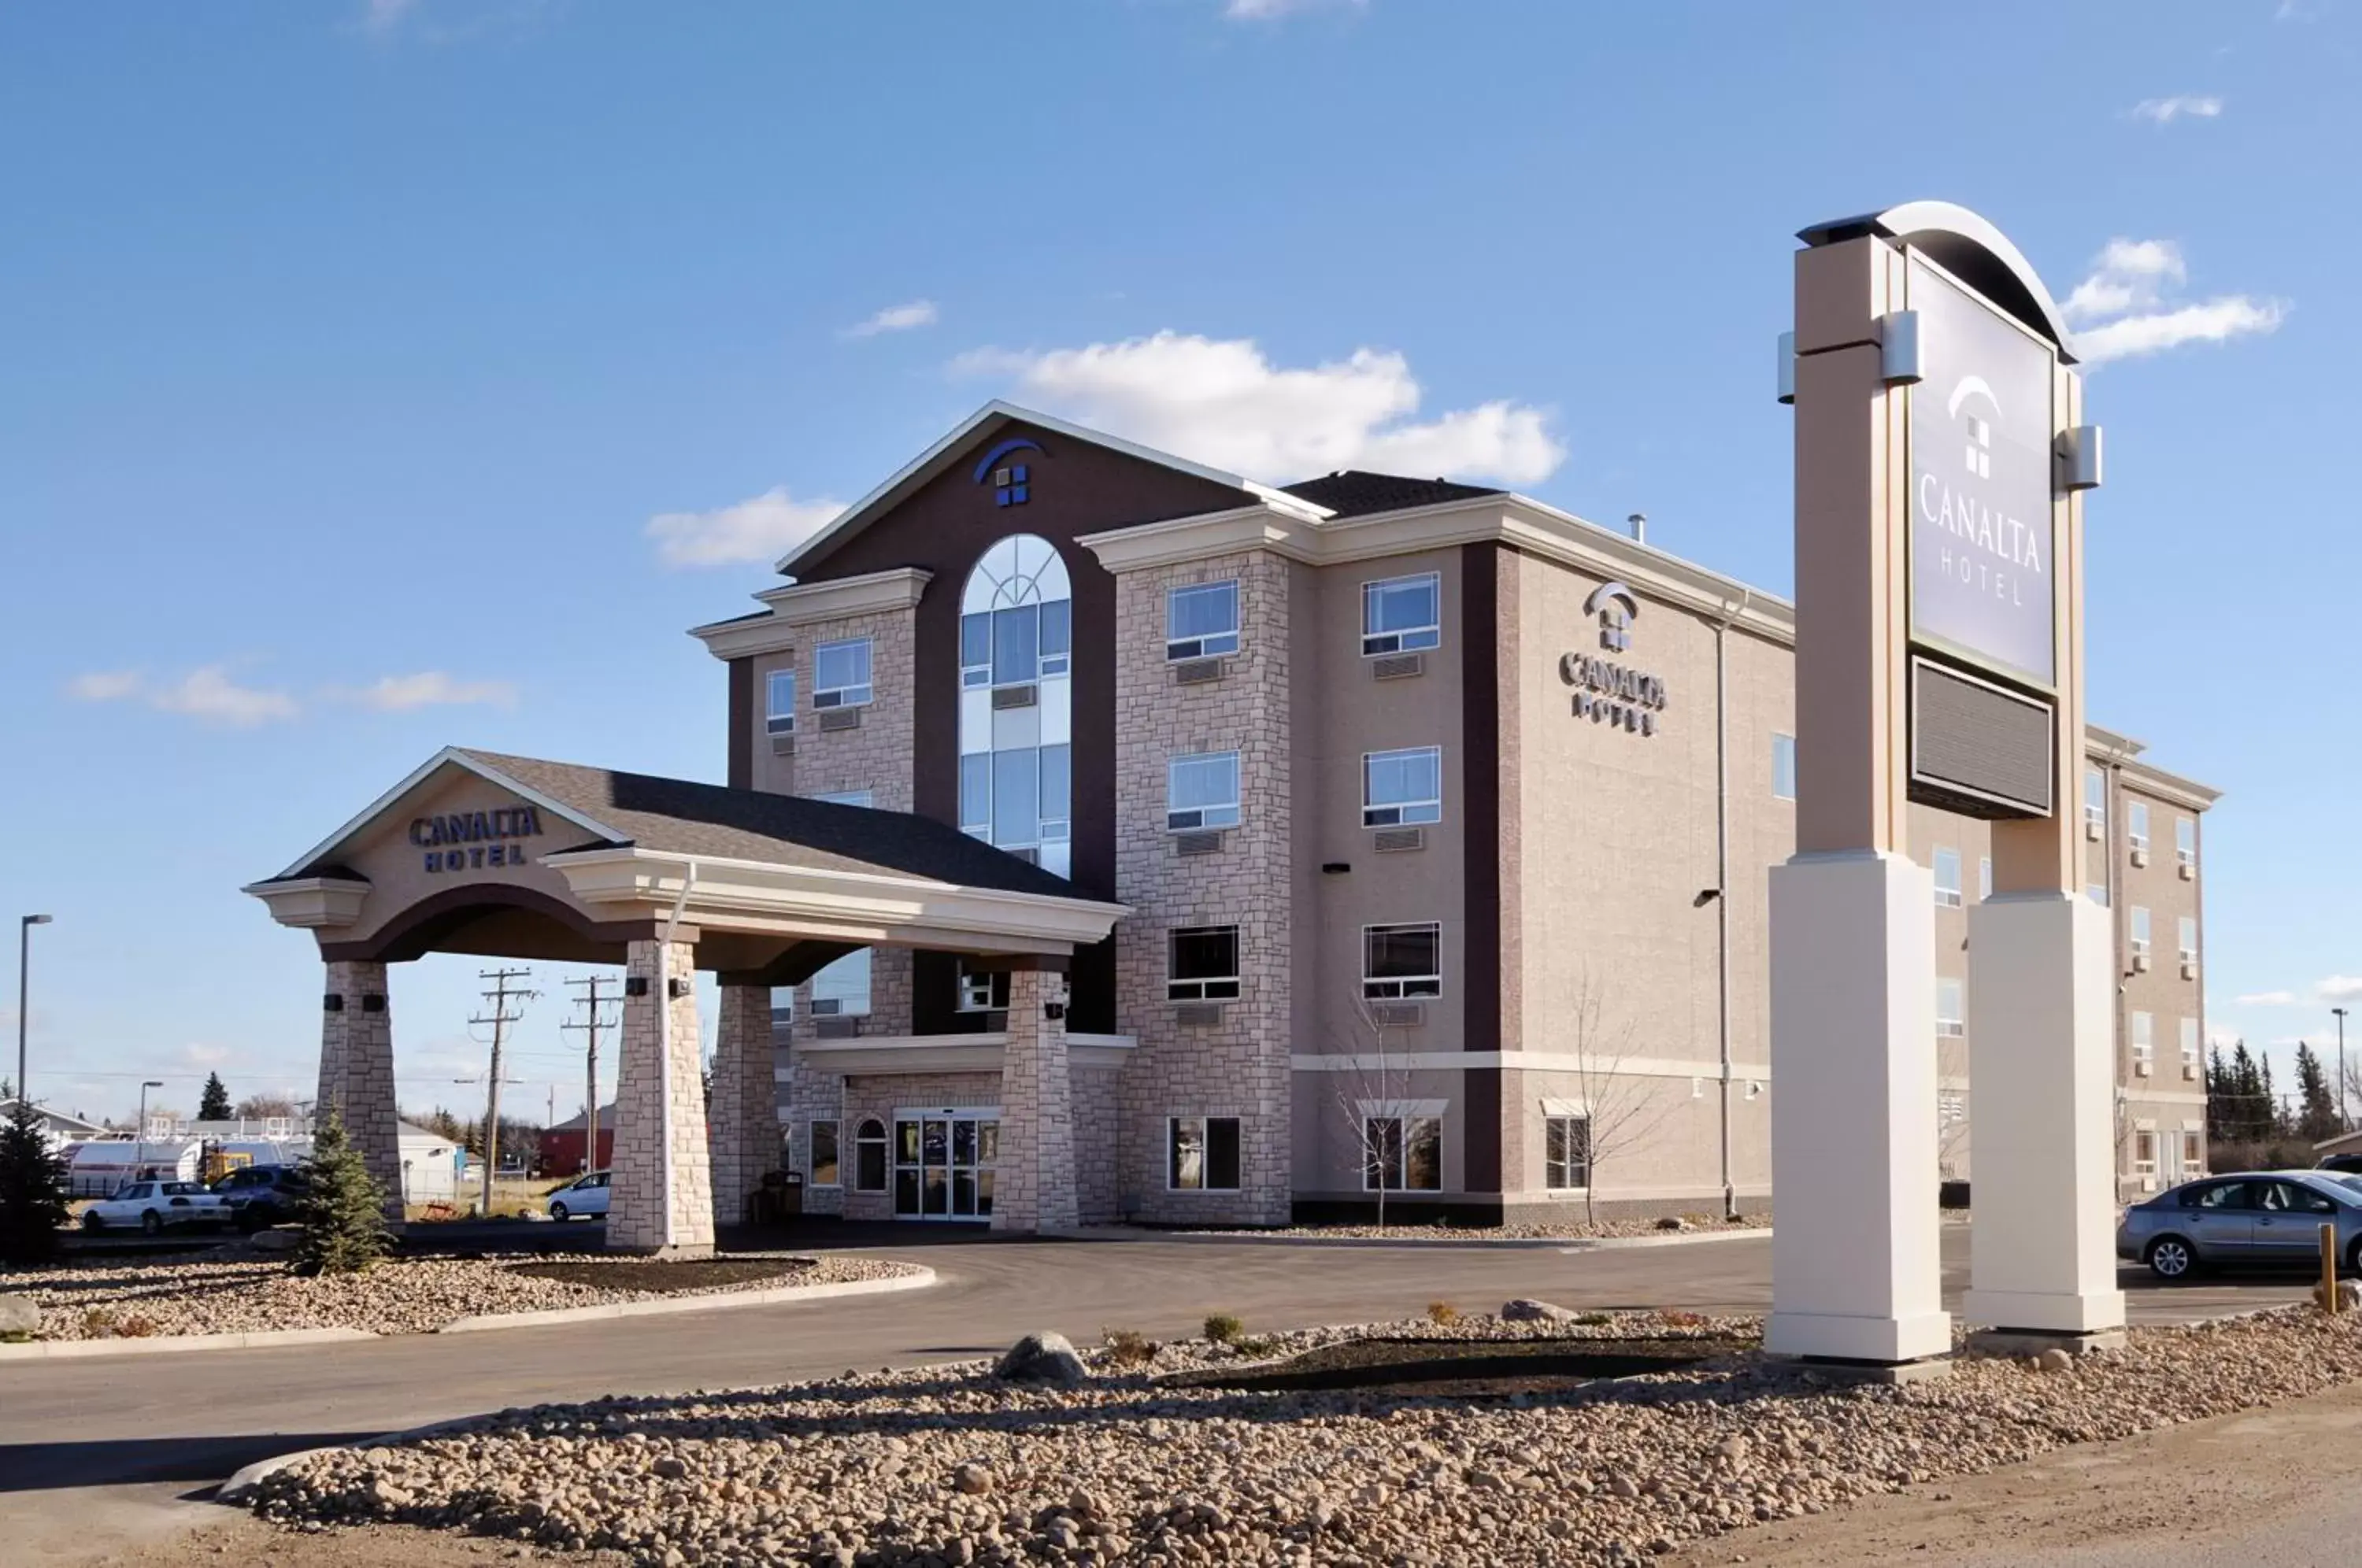 Property building in Canalta Hotel Melfort